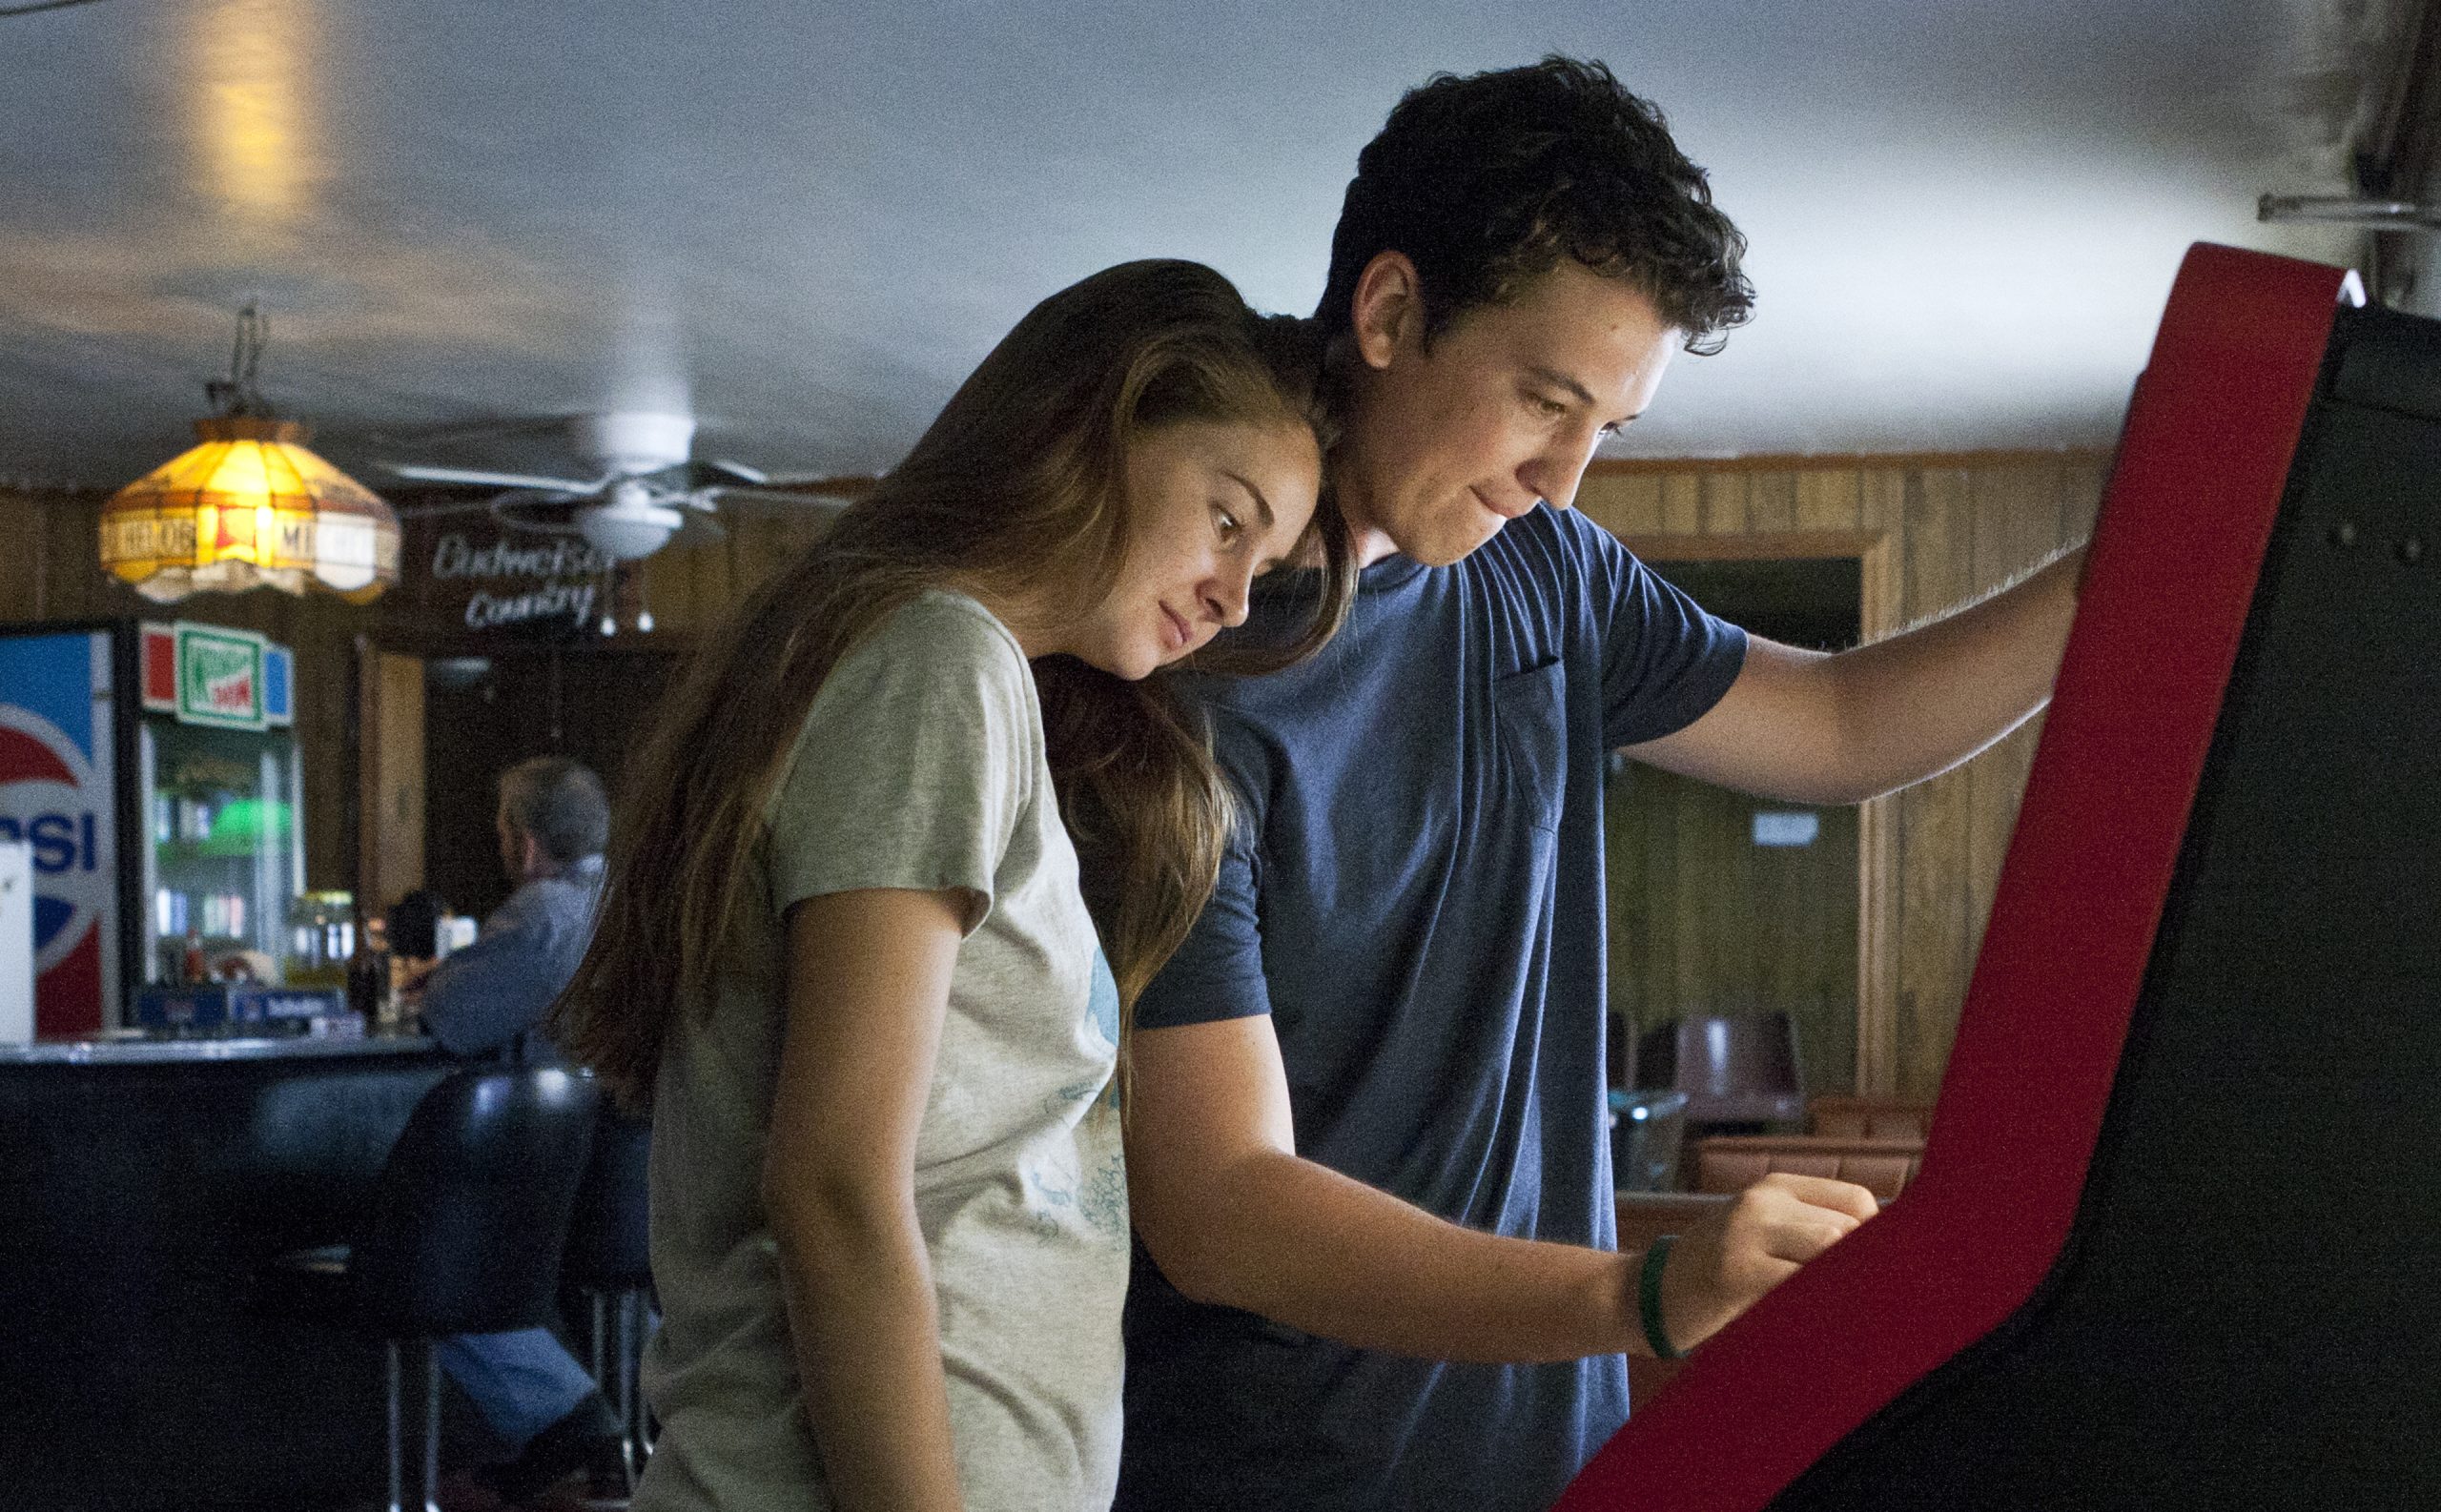 Miles Teller Movies Ranked – The Good, The Great, and The Spectacular